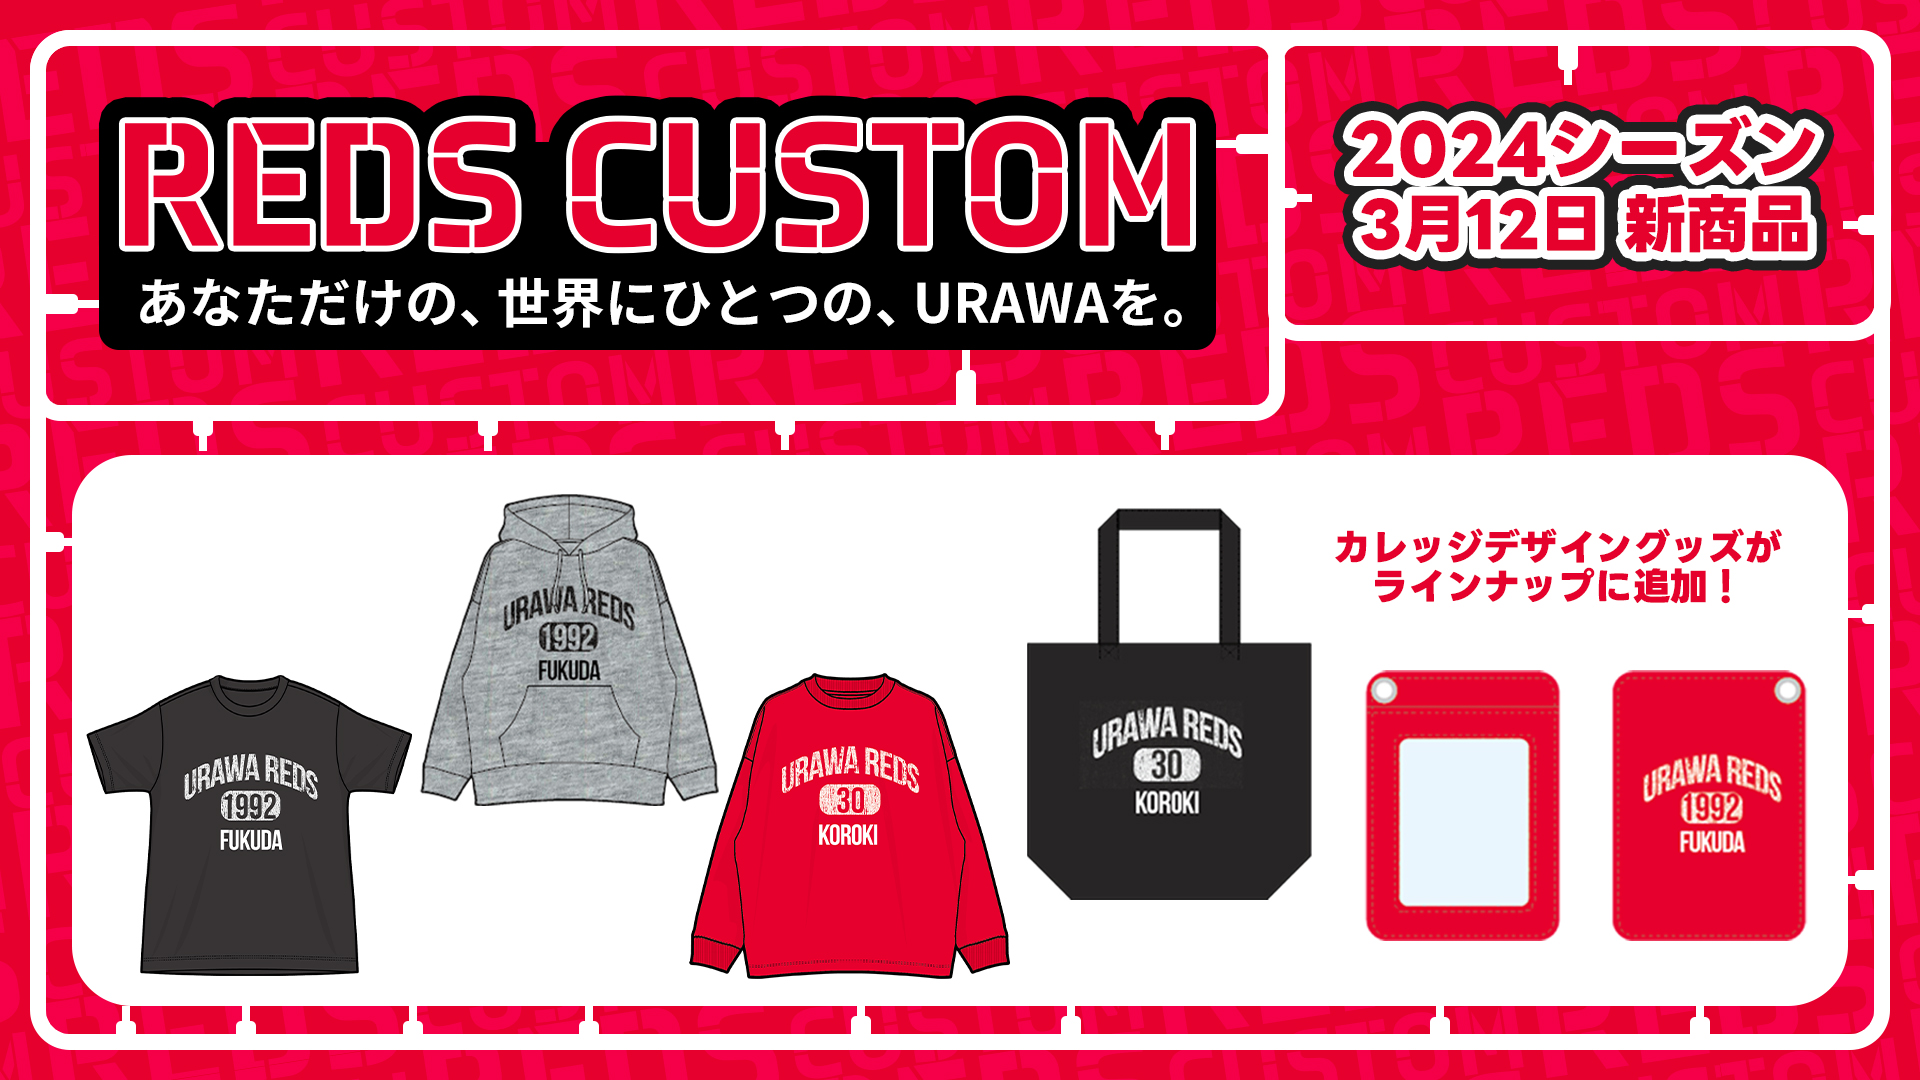 New products will be available at &quot;REDS CUSTOM&quot; from 18:00 on 3/8 (Friday)!!